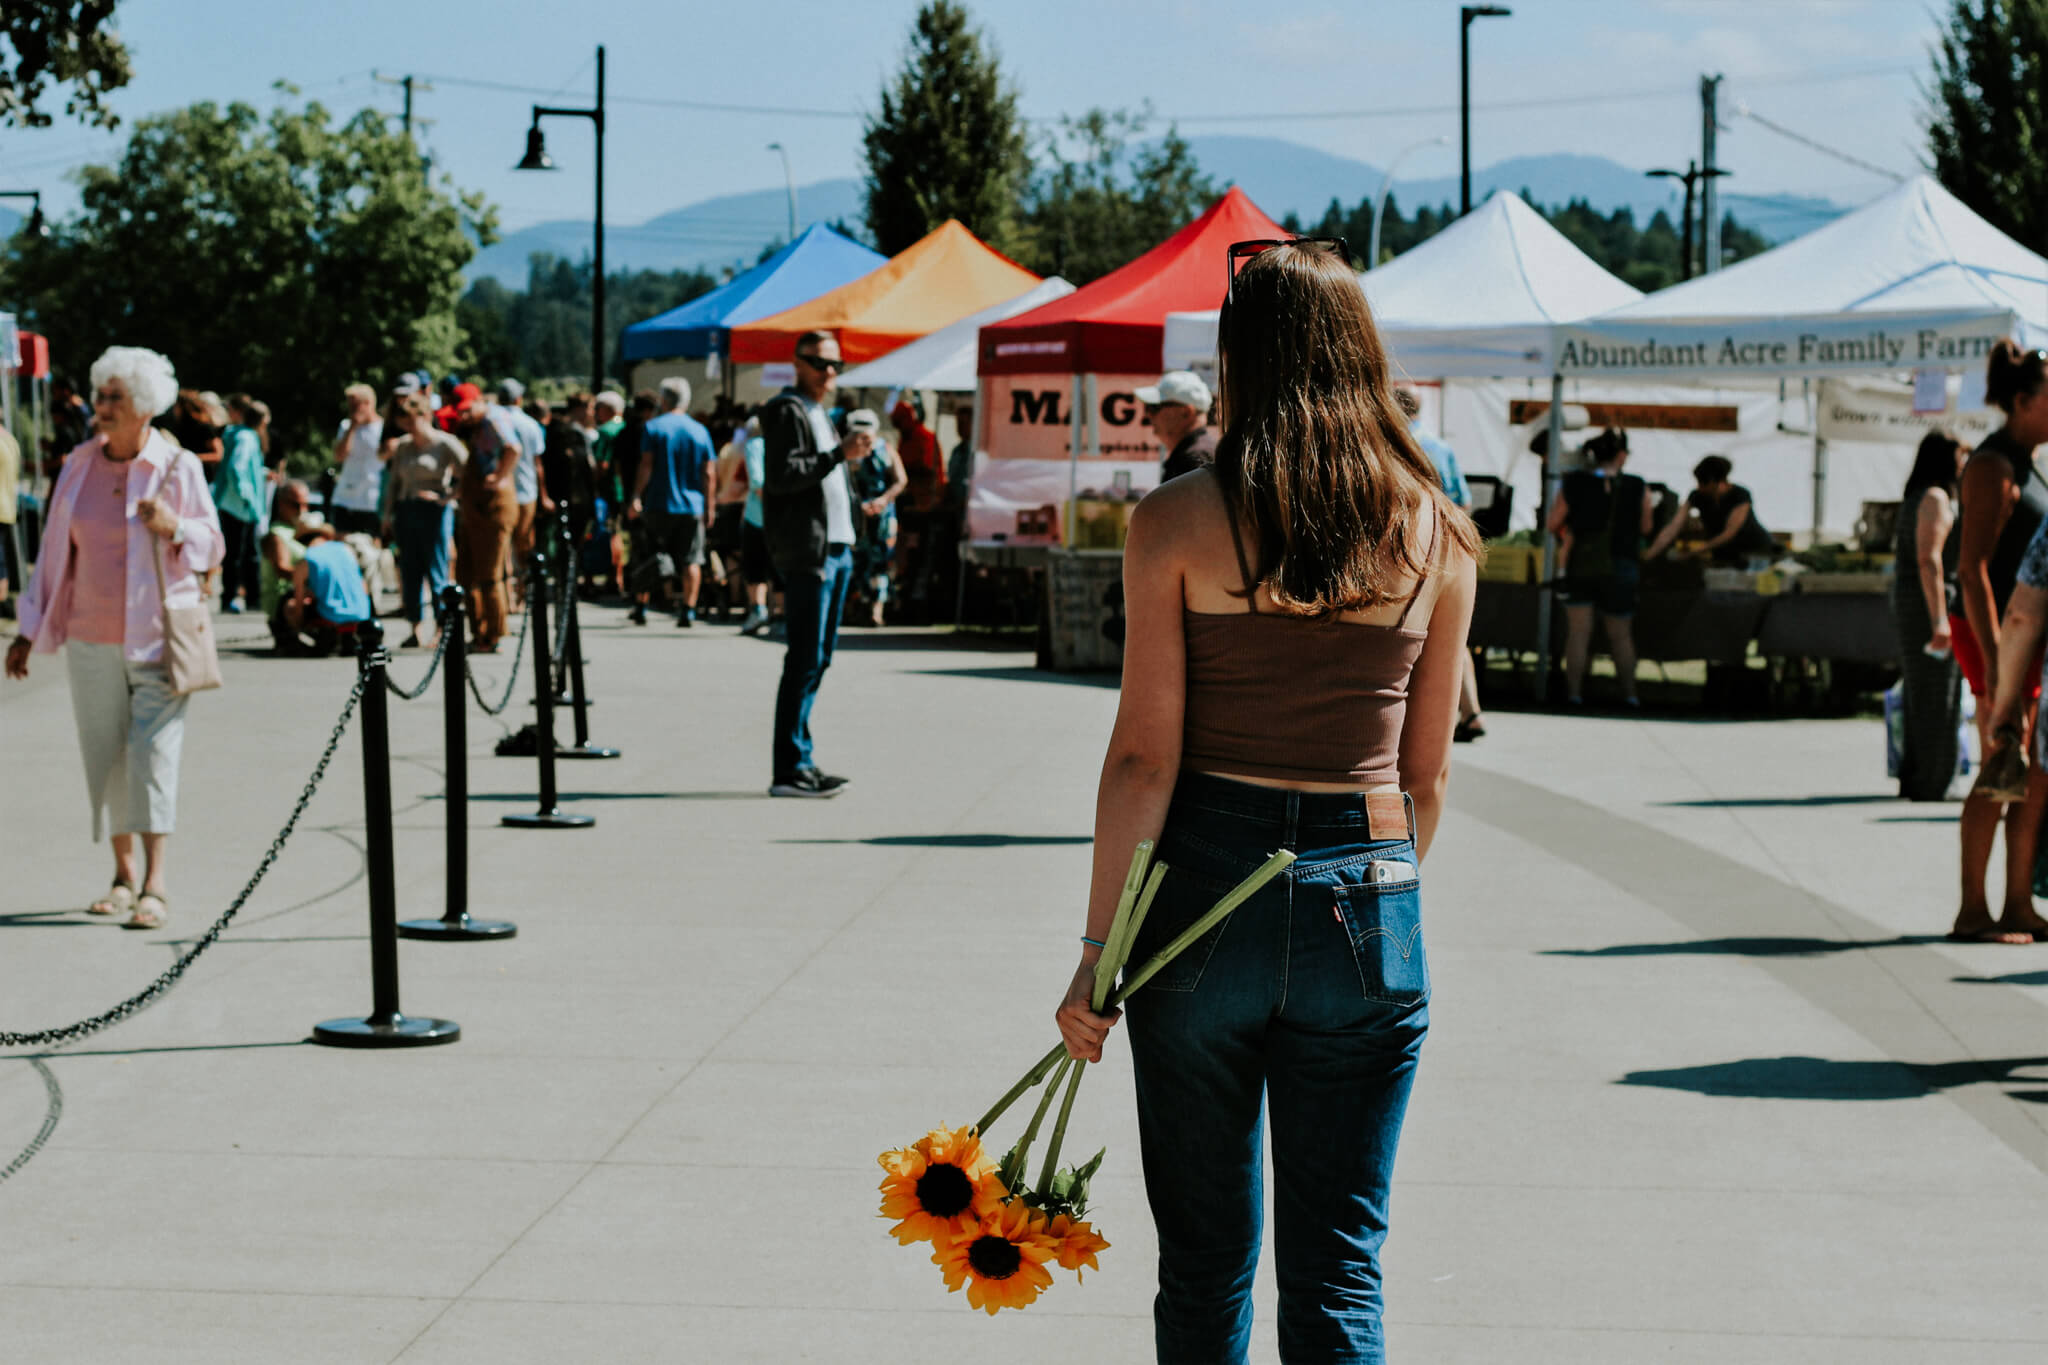 A woman walks through a farmers market on a bright sunny day, carrying a bouquet of sunflowers.